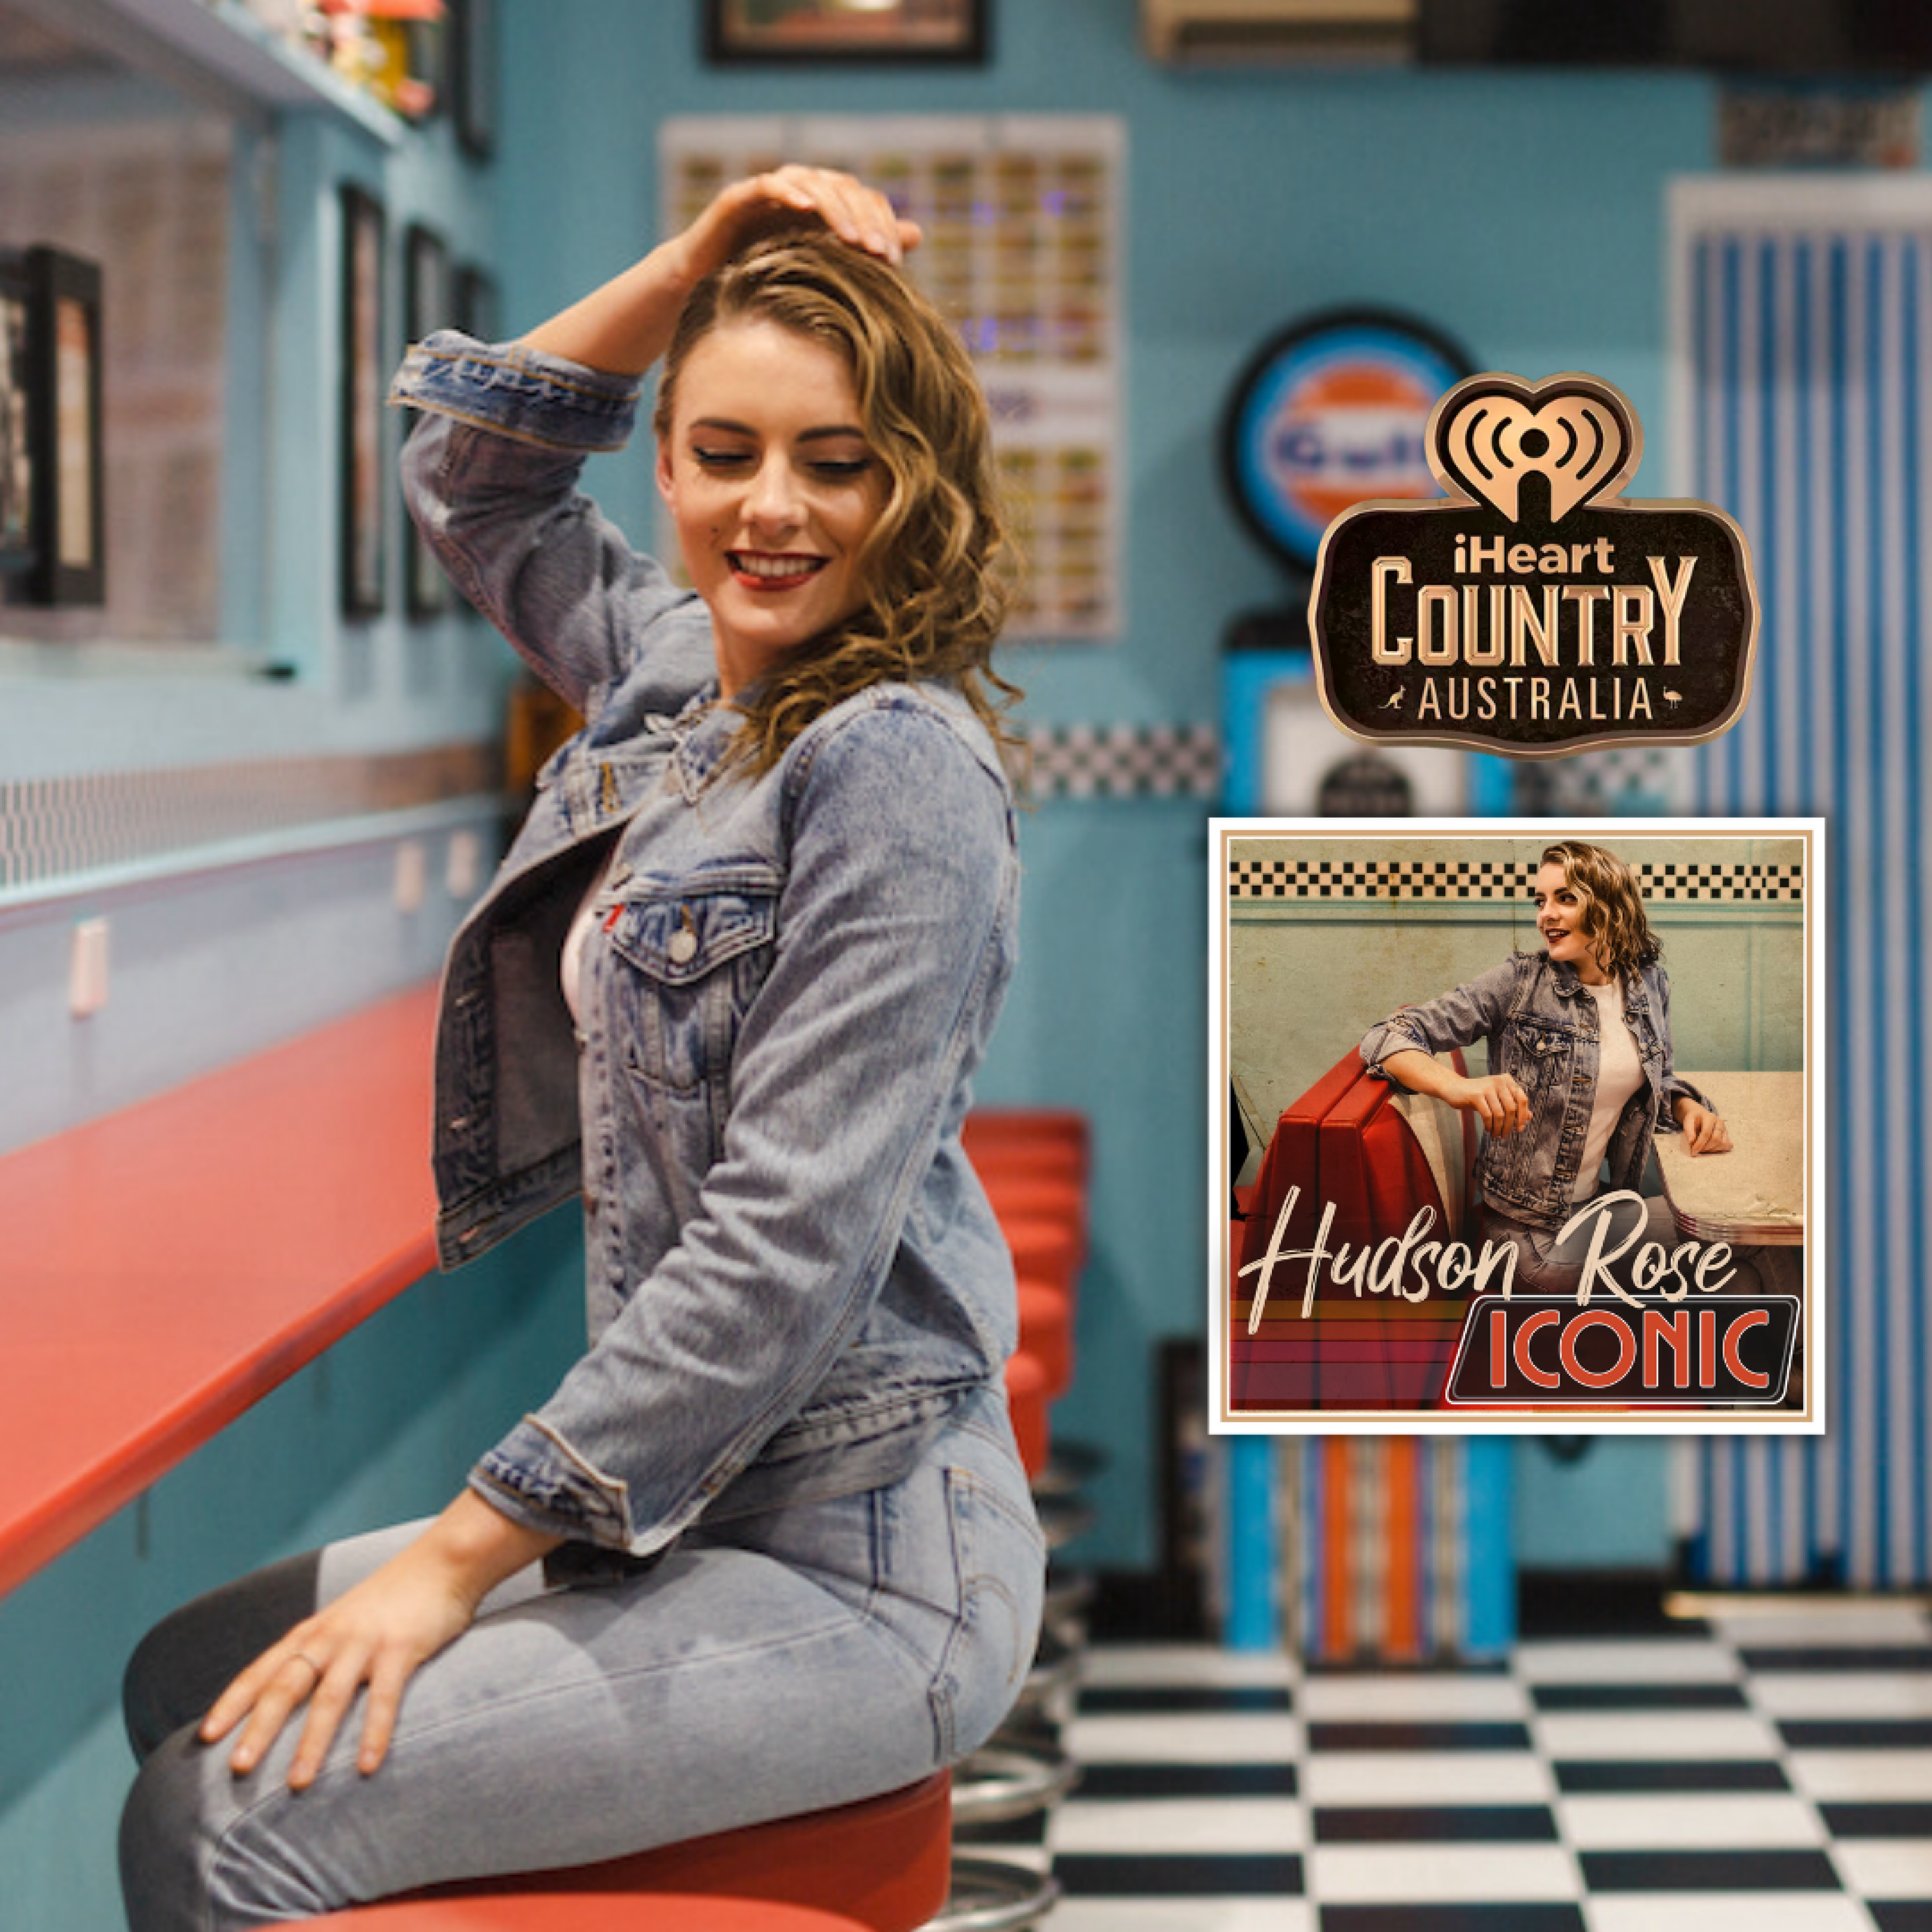 Hudson Rose - 'Iconic' Added ATB to iHeart Country